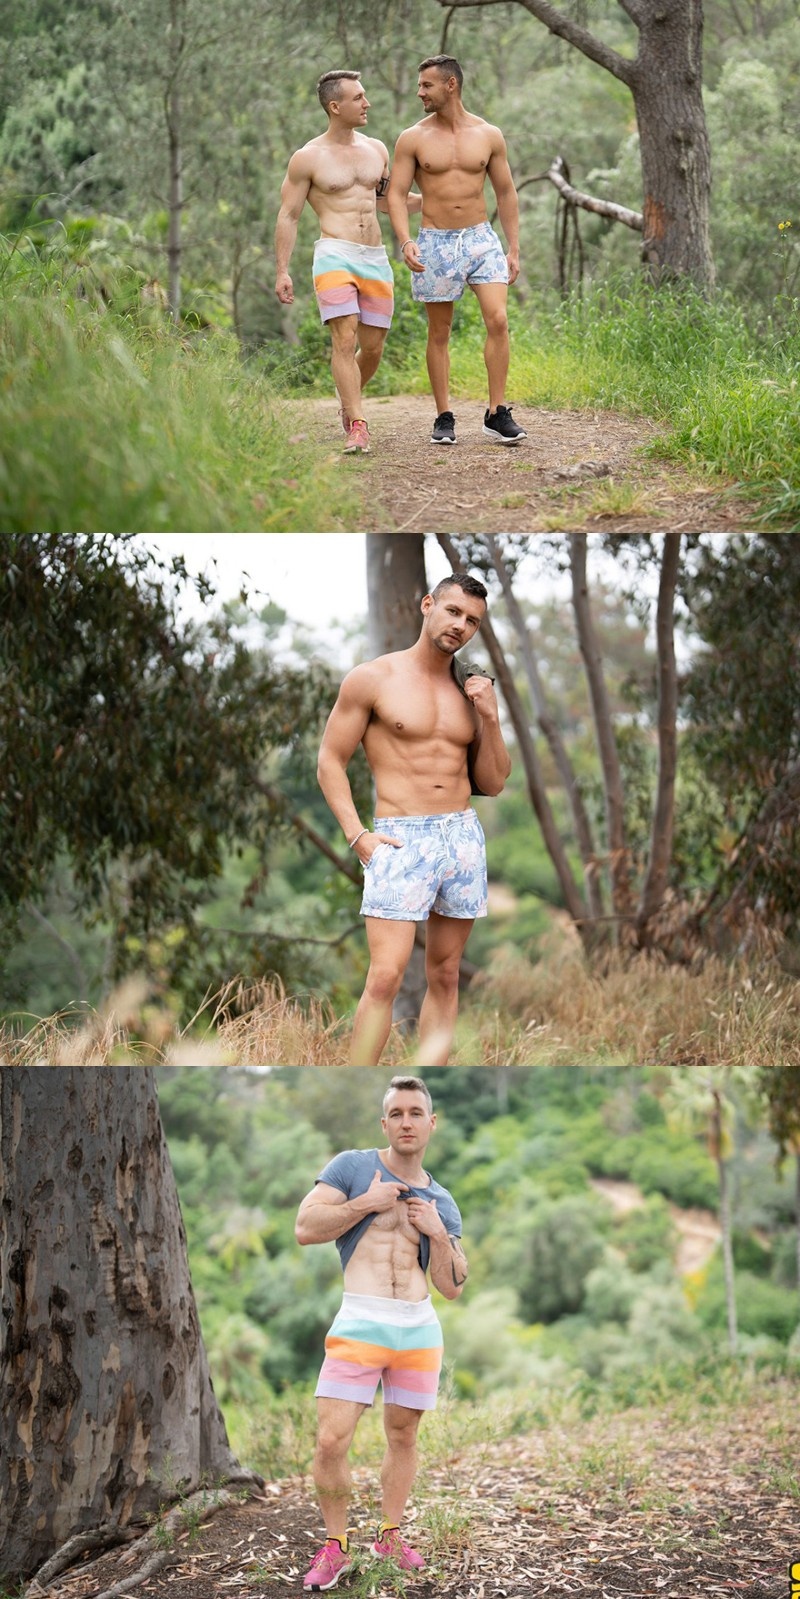 Two New Sean Cody Studs Fuck in First Video